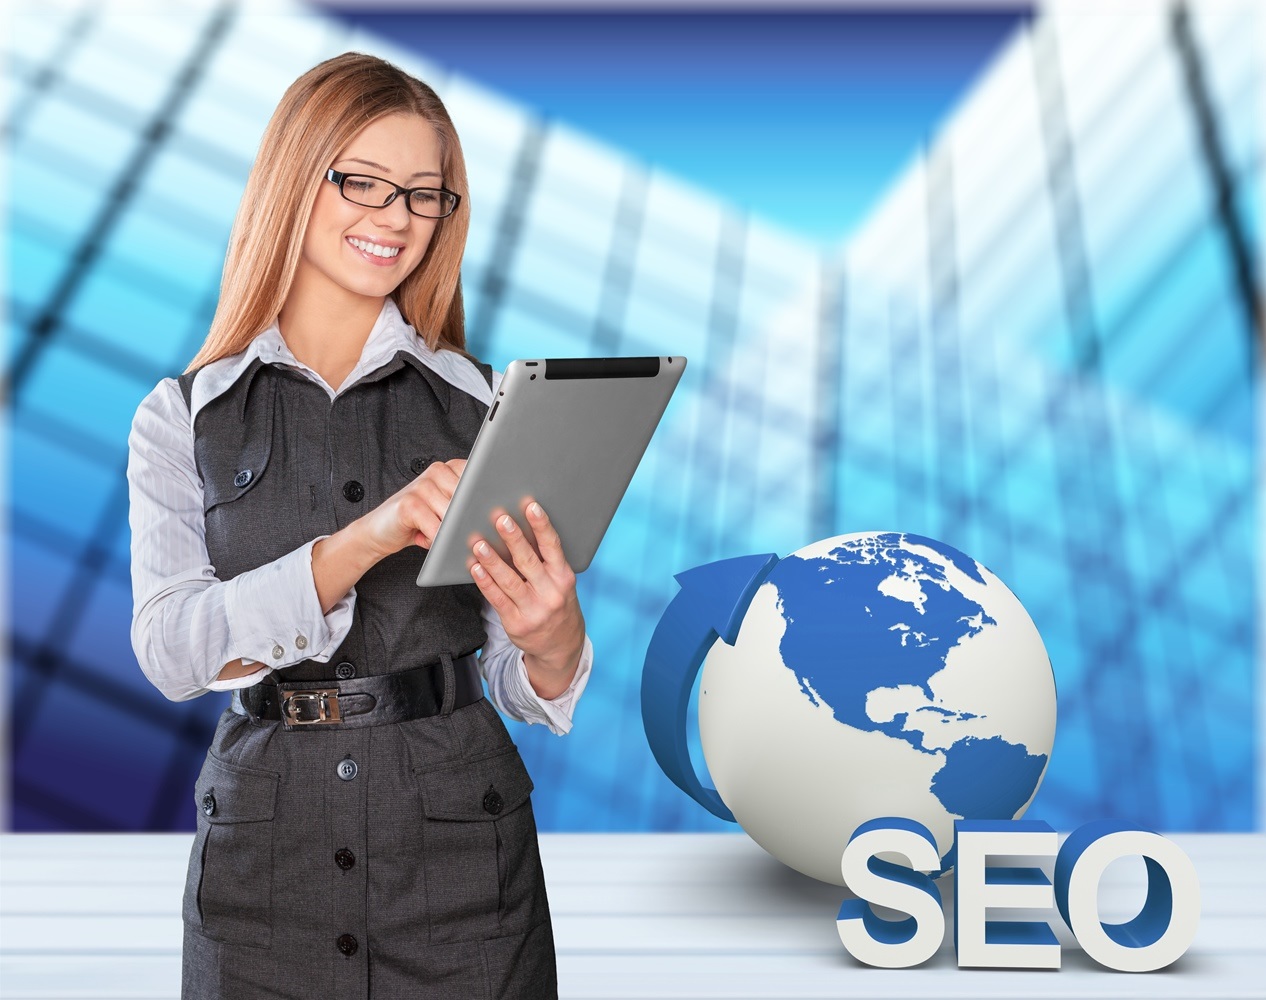 An Intro to SEO Every Small Business Needs to Make the Most of Their Digital Marketing